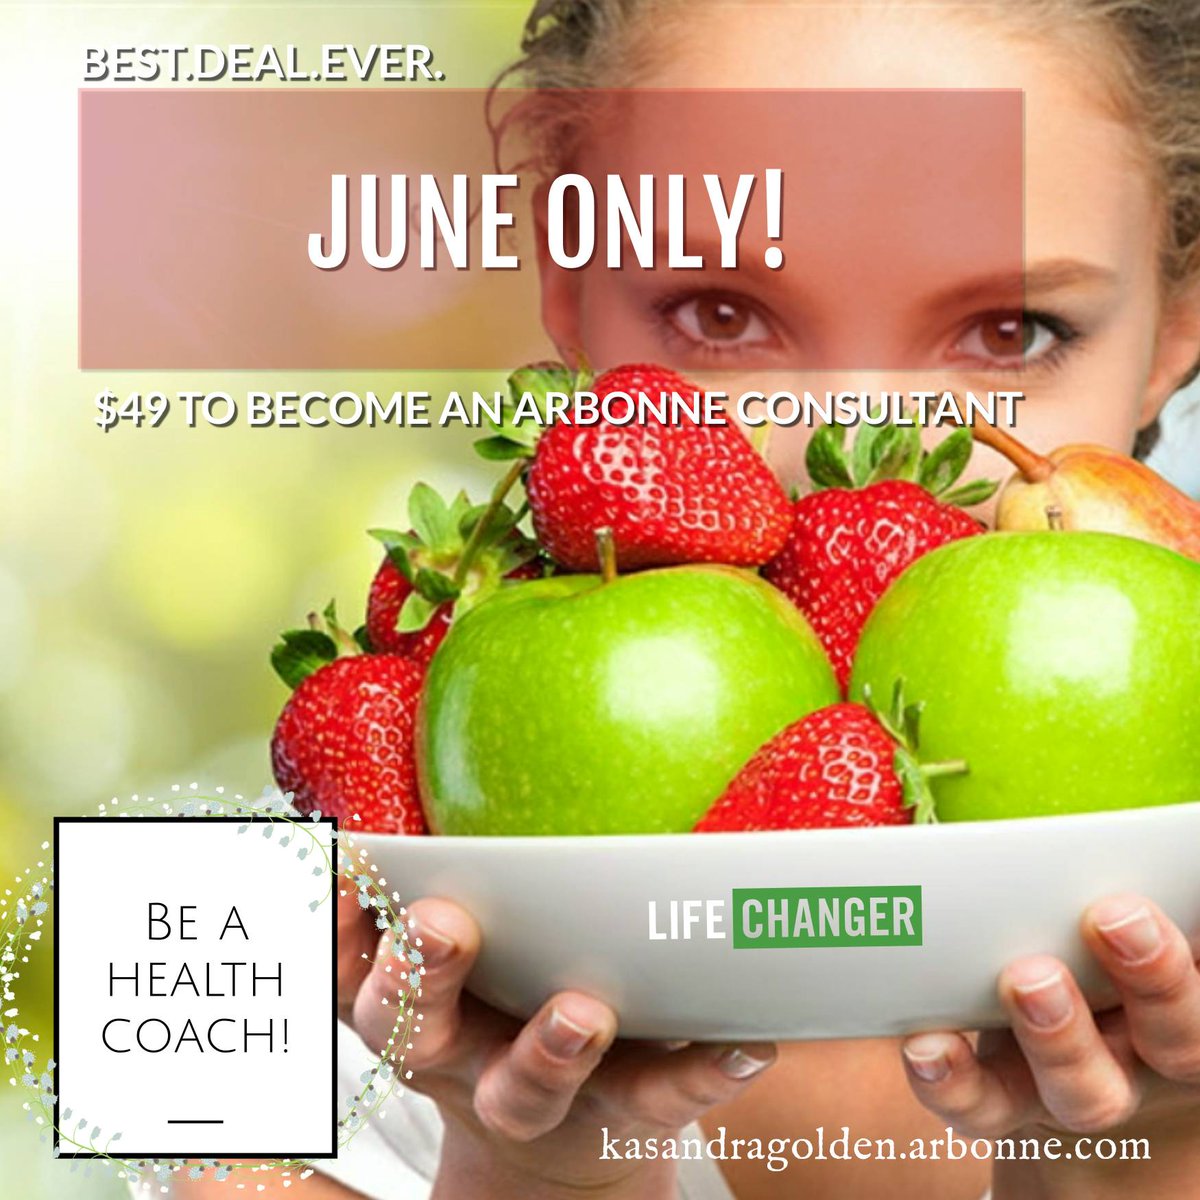 🙊🙊🙊 It's never been a better time! 💃 Who wants to lock arms and change lives? 🙋👭👫  

Learn more! 👉 bit.ly/2CfldP4

#juneonly